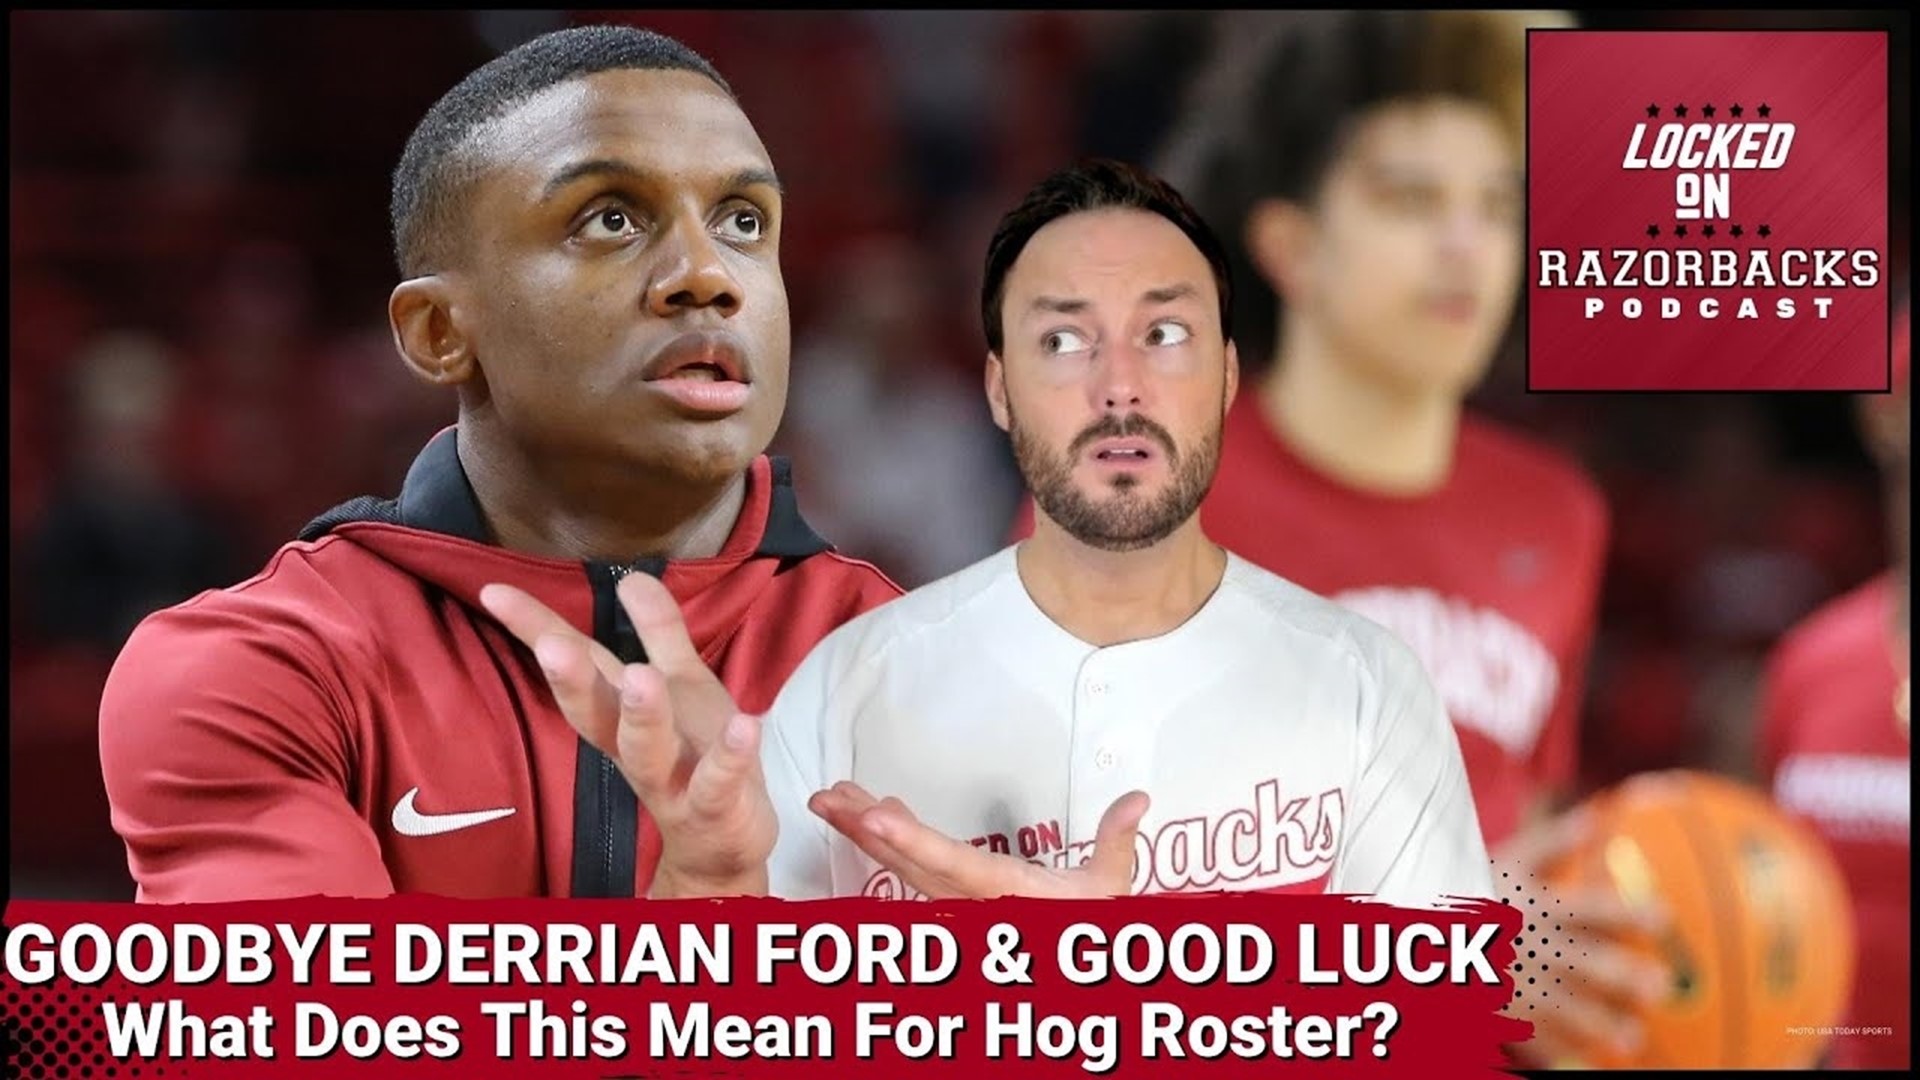 John Nabors reacts to the news of Razorback Basketball Guard Derrian Ford officially entering into the transfer portal. What does this mean for Eric Musselman's team